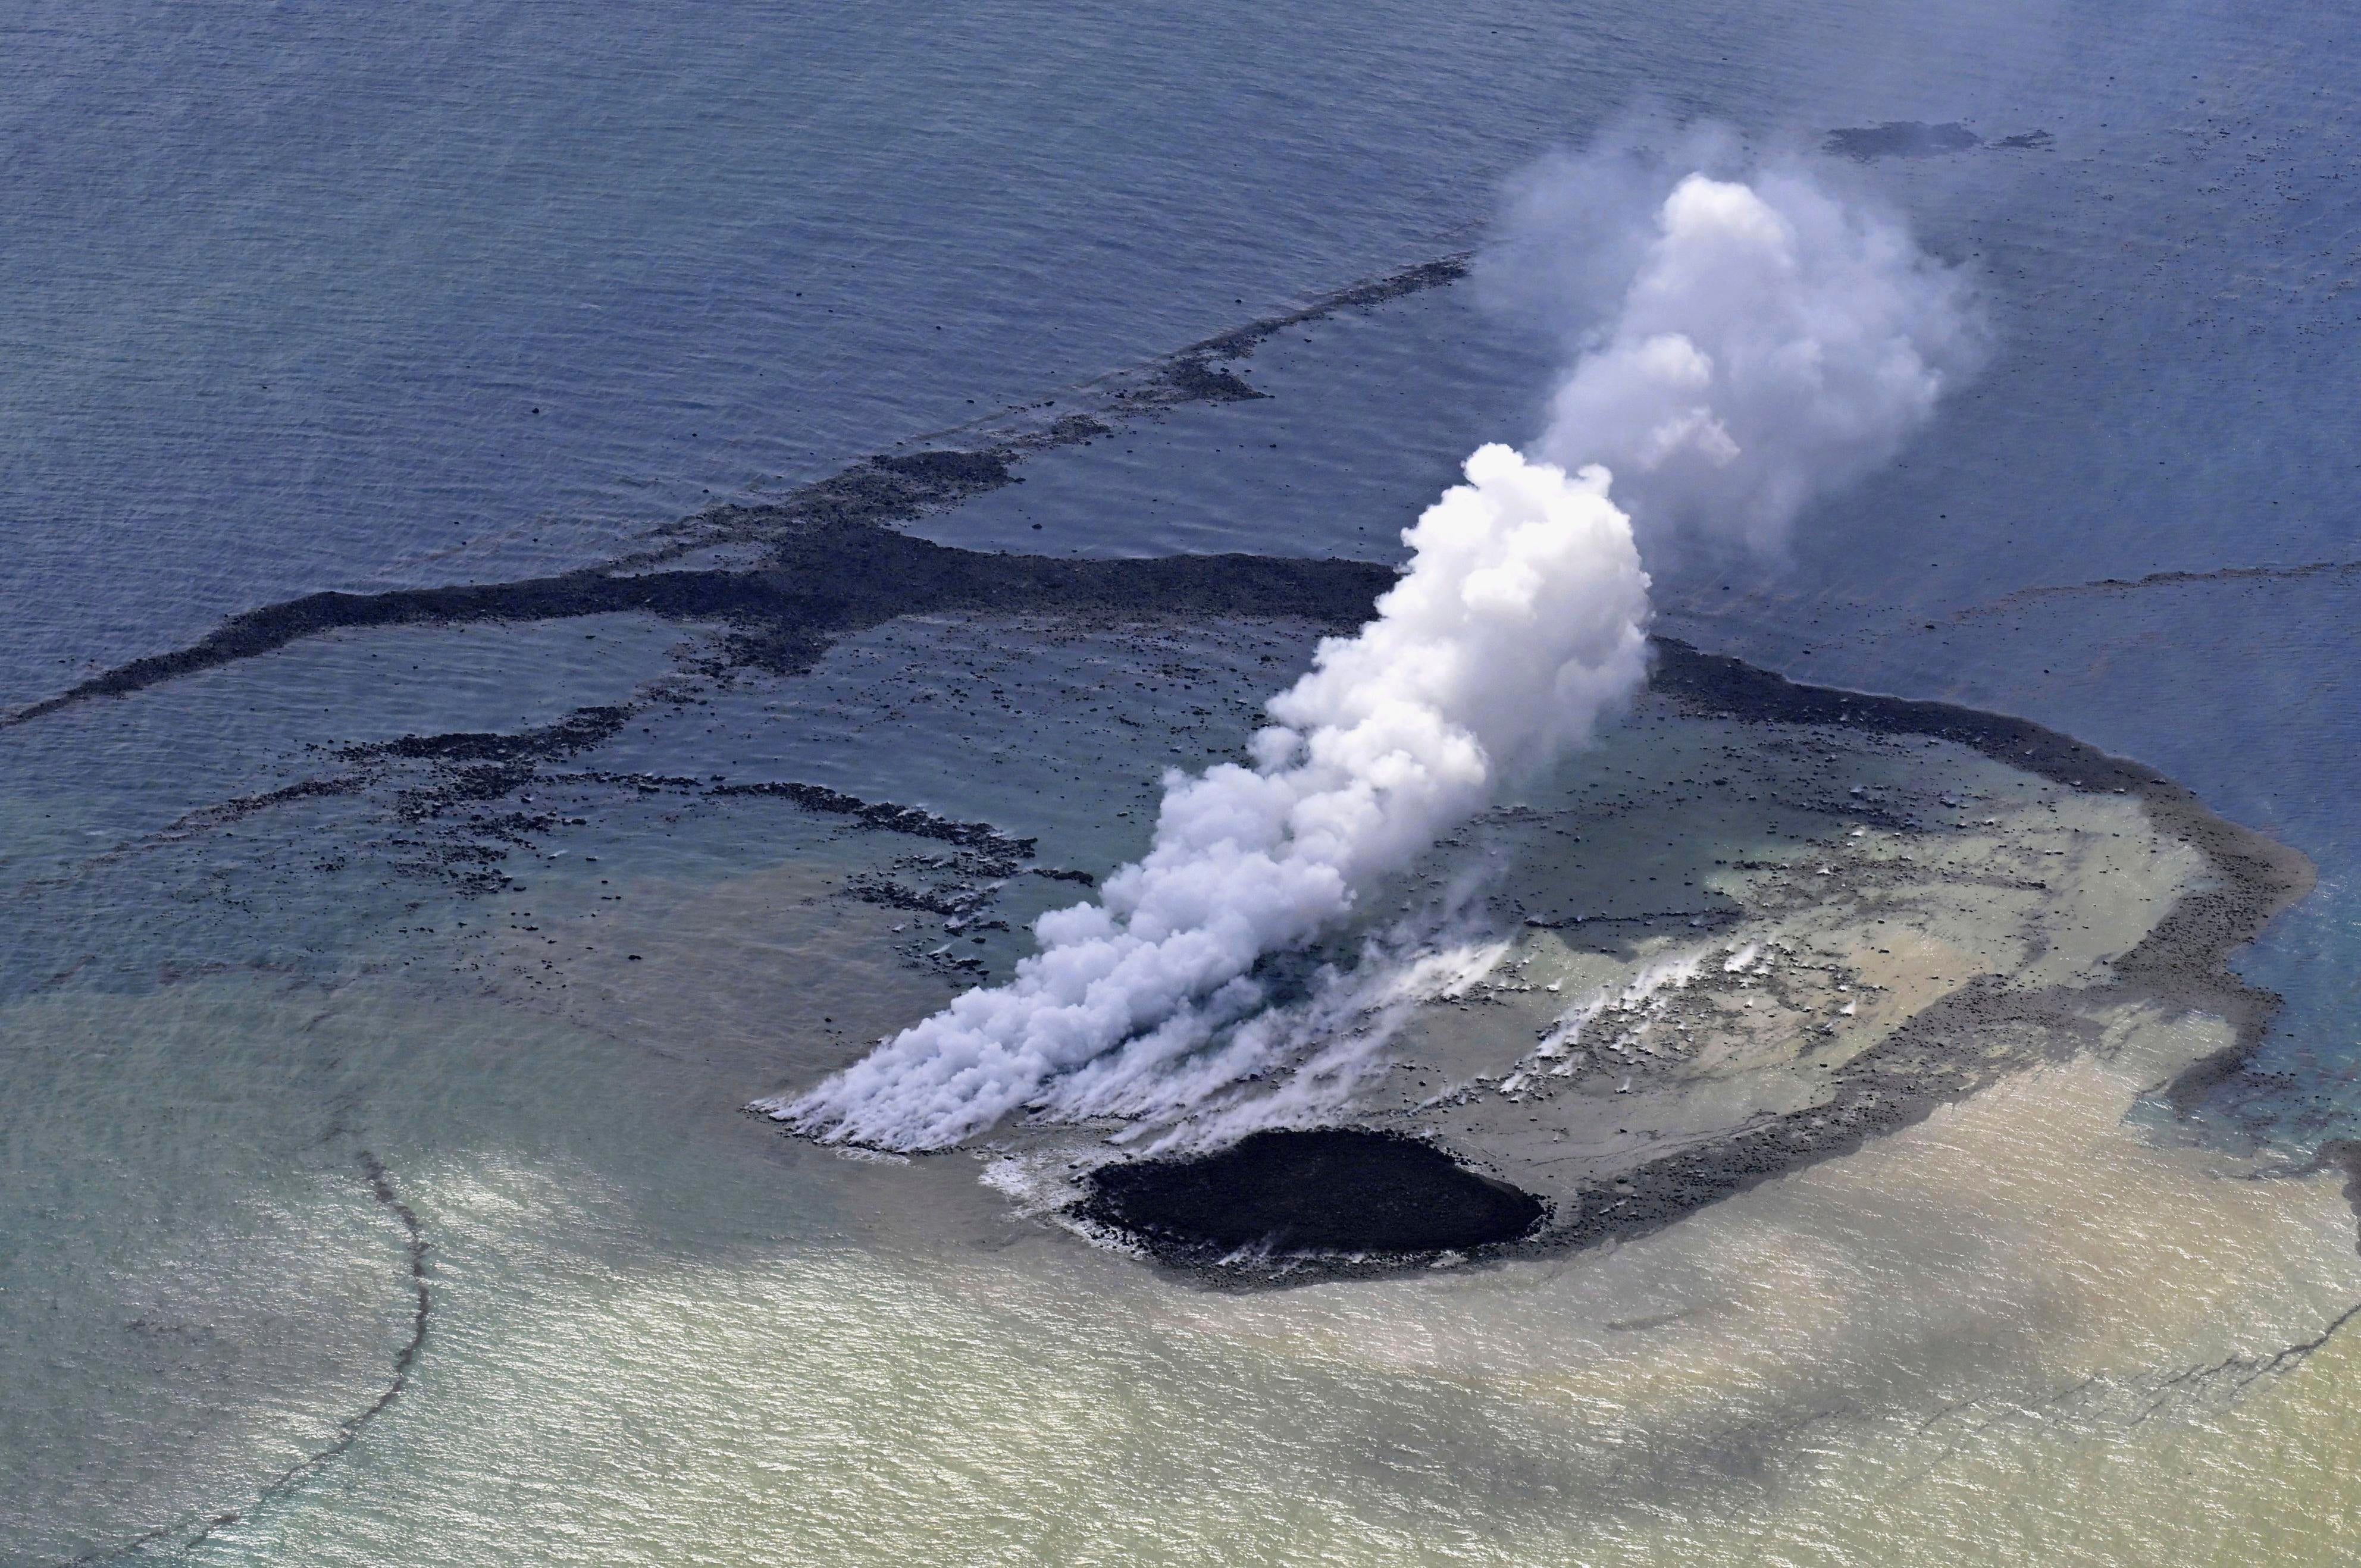 The new island formed by erupted rock